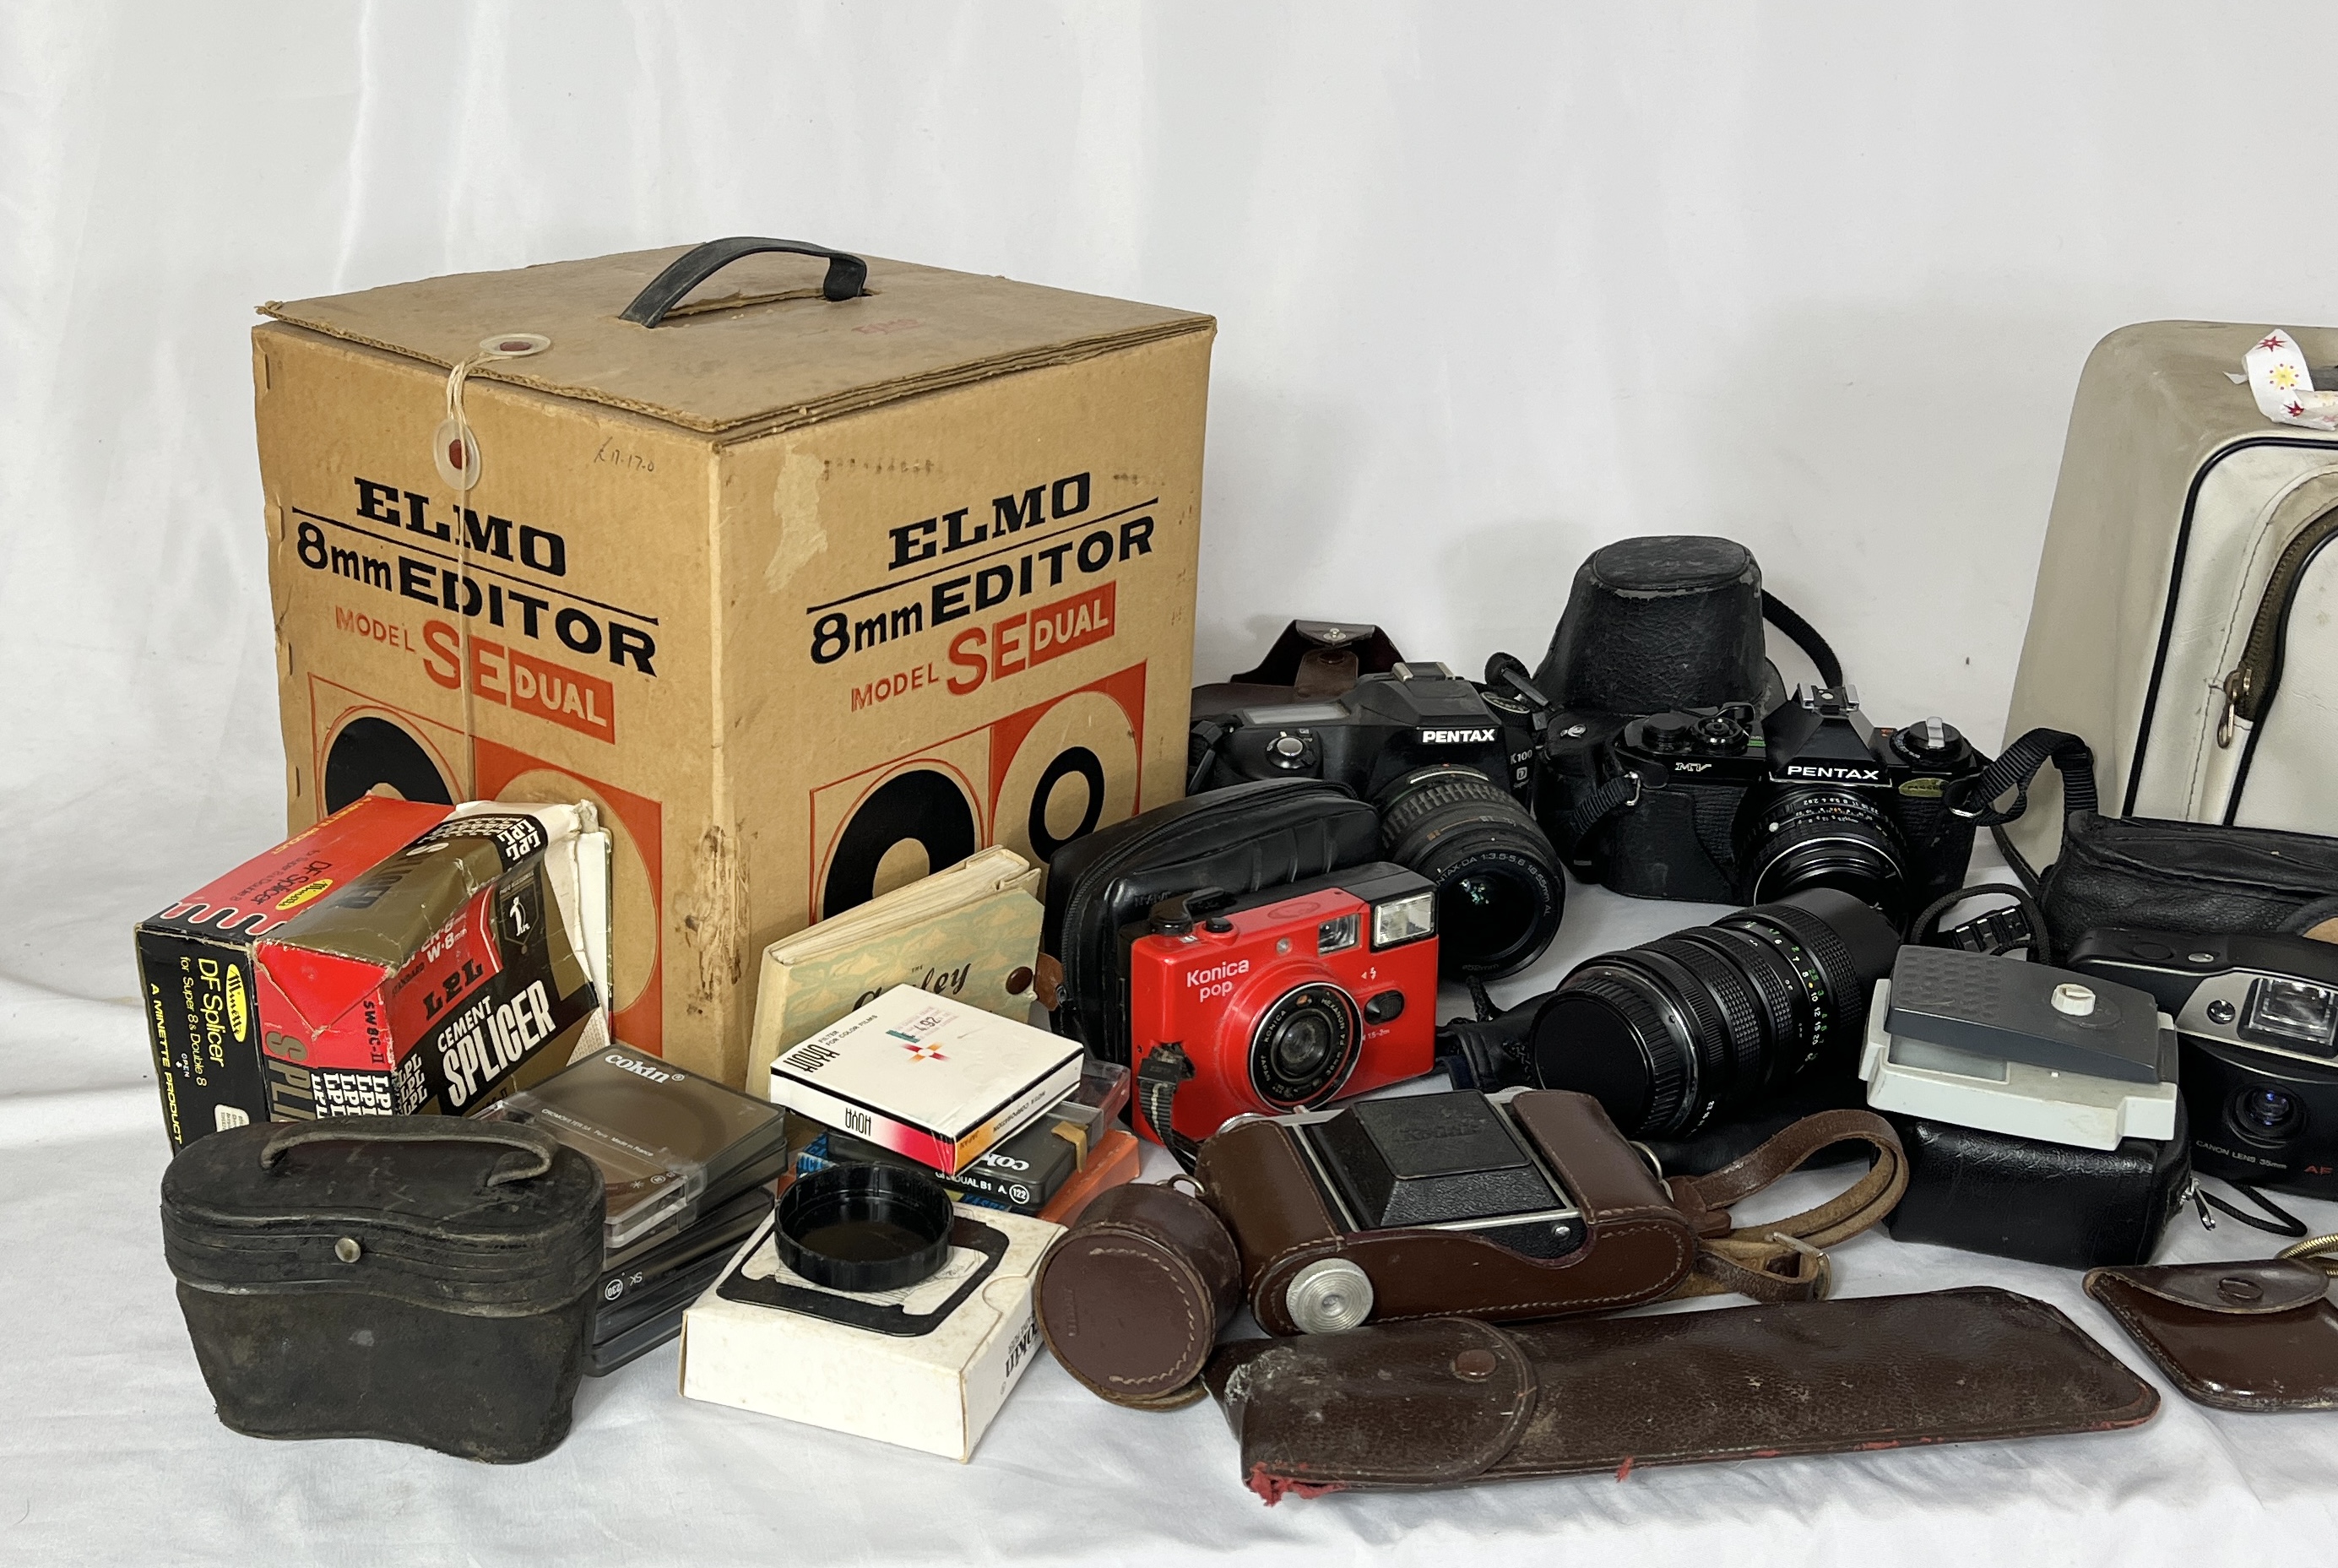 A collection of vintage cameras and camera equipment including Konica Pop, Pentax, Eumig etc. - Image 2 of 4